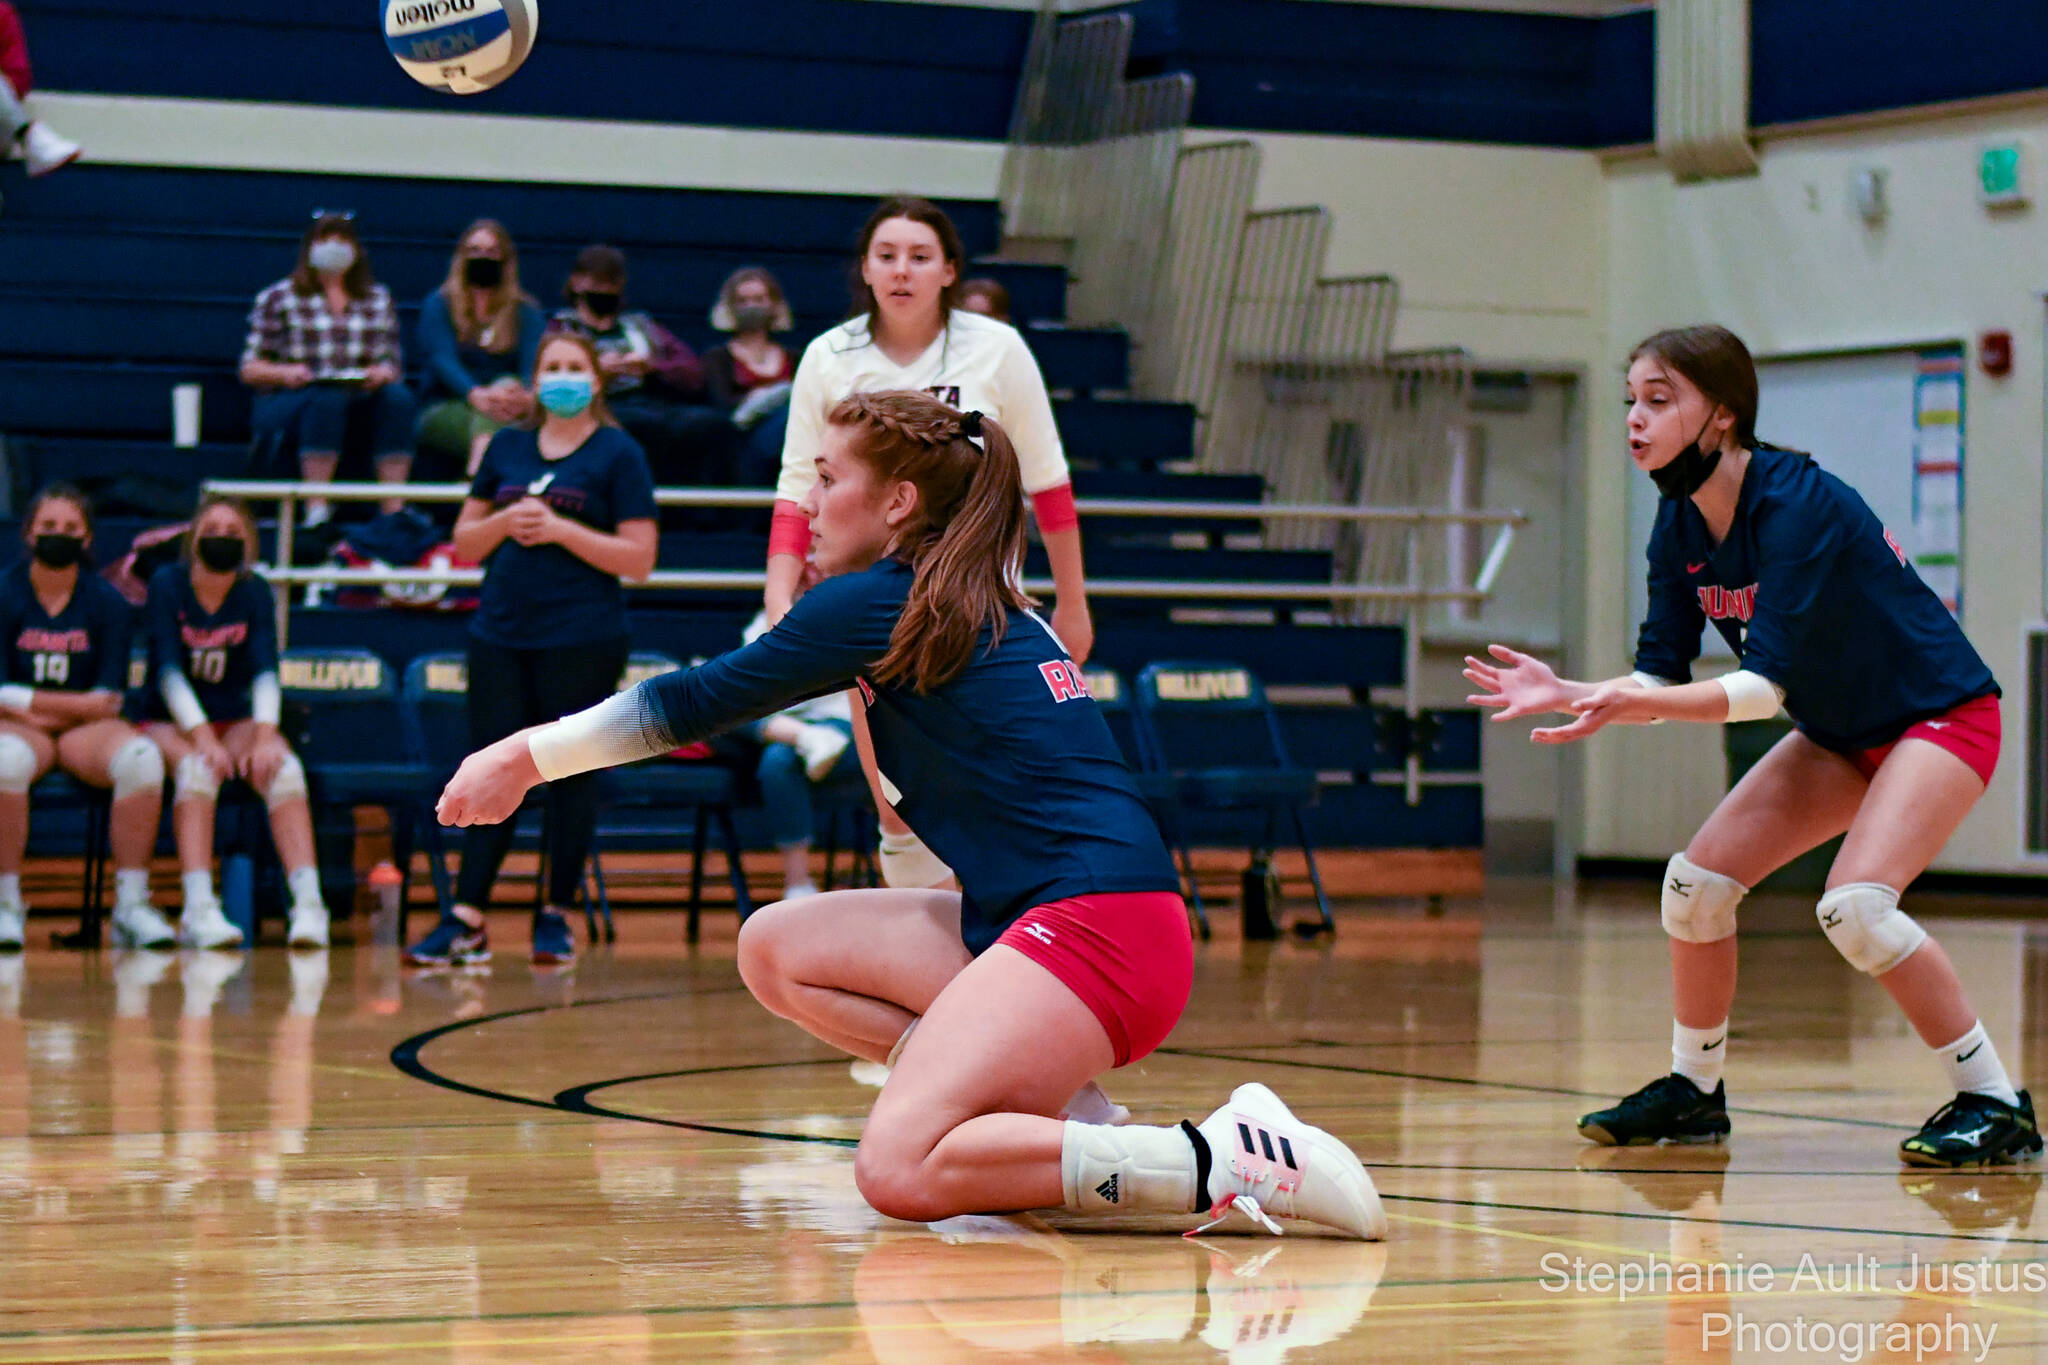 Juanita’s Ashley Schroeder notches a dig during her squad’s 3-0 volleyball loss to Bellevue on Sept. 20. Photo courtesy of Stephanie Ault Justus